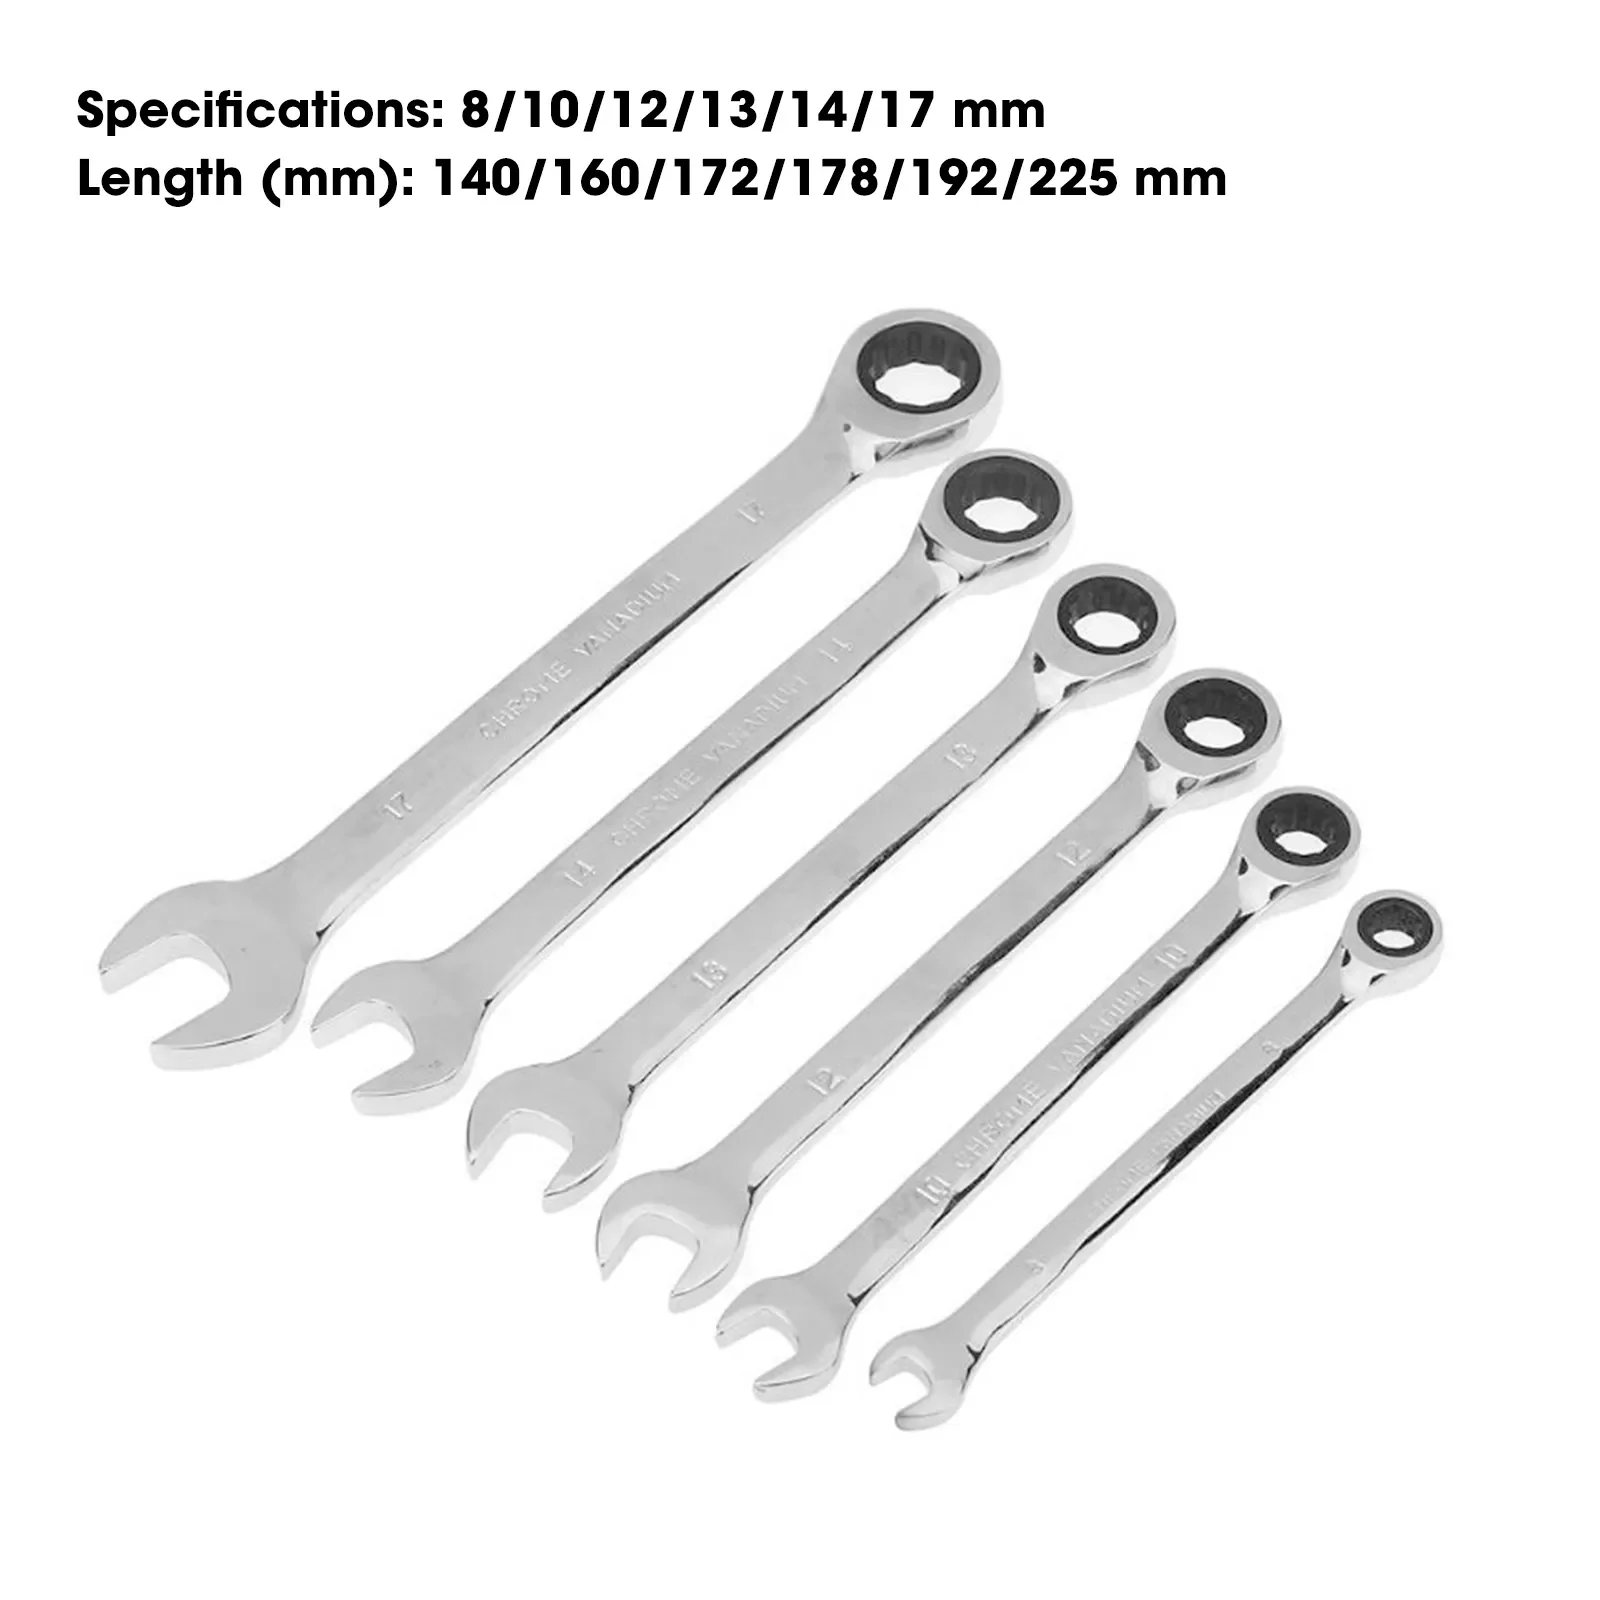 6pcs Ratchet Wrench Fixed Head Wrench Set Hand Tools